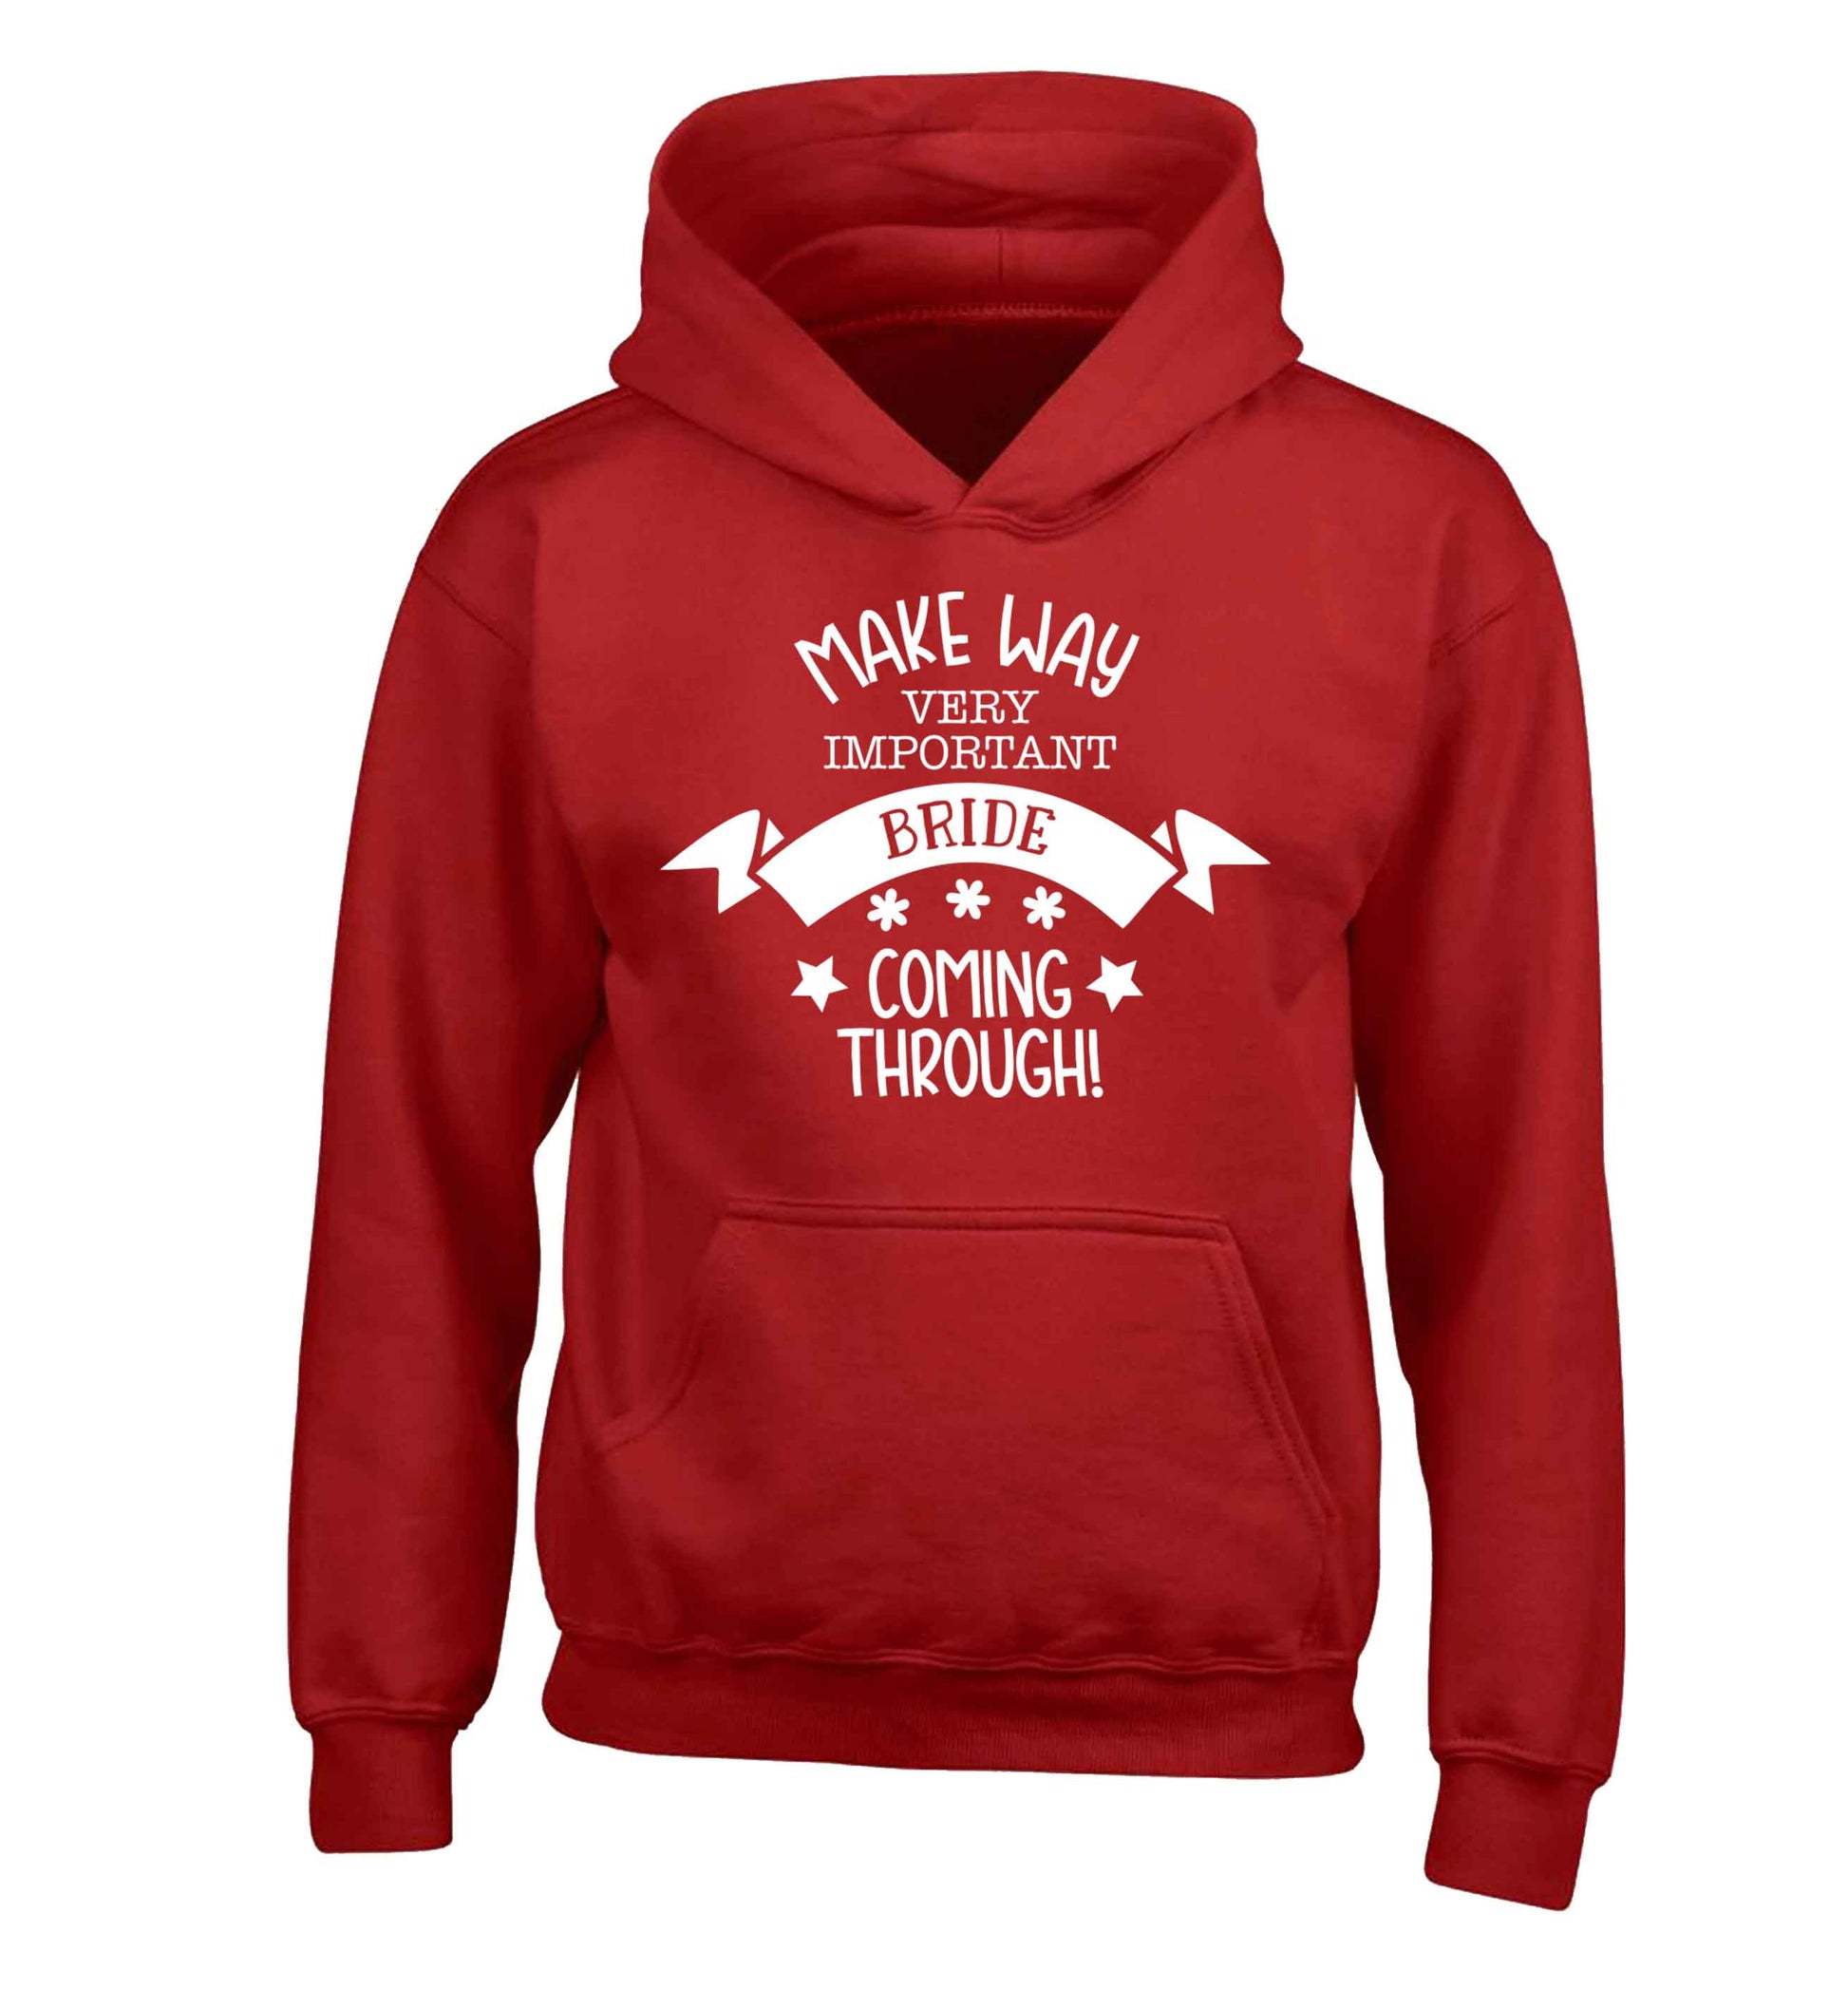 Make way V.I.P very important bride coming through! children's red hoodie 12-13 Years